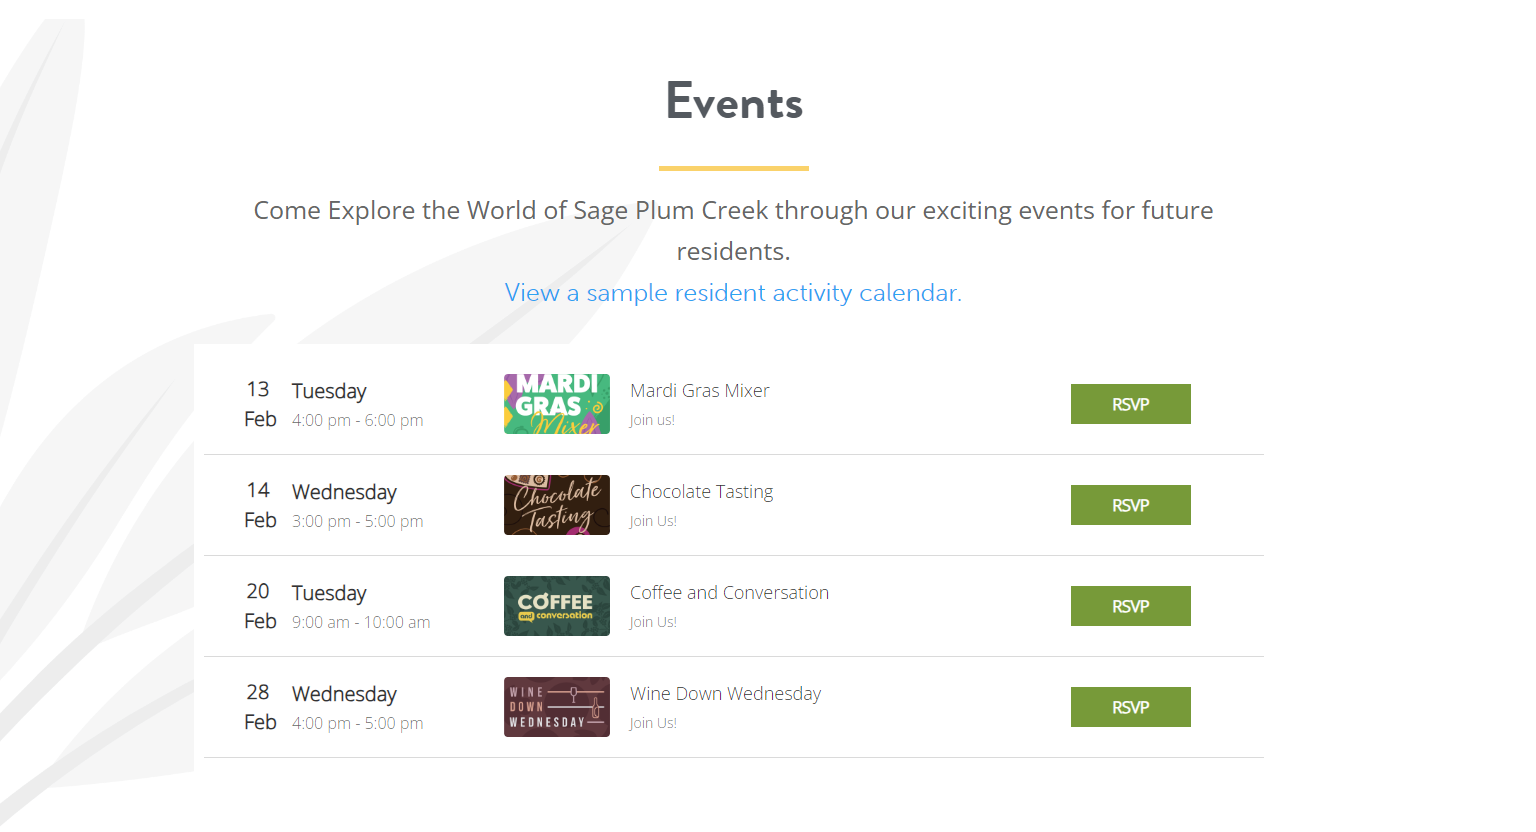 Sage Plum Creek Apartments - Things to Do!